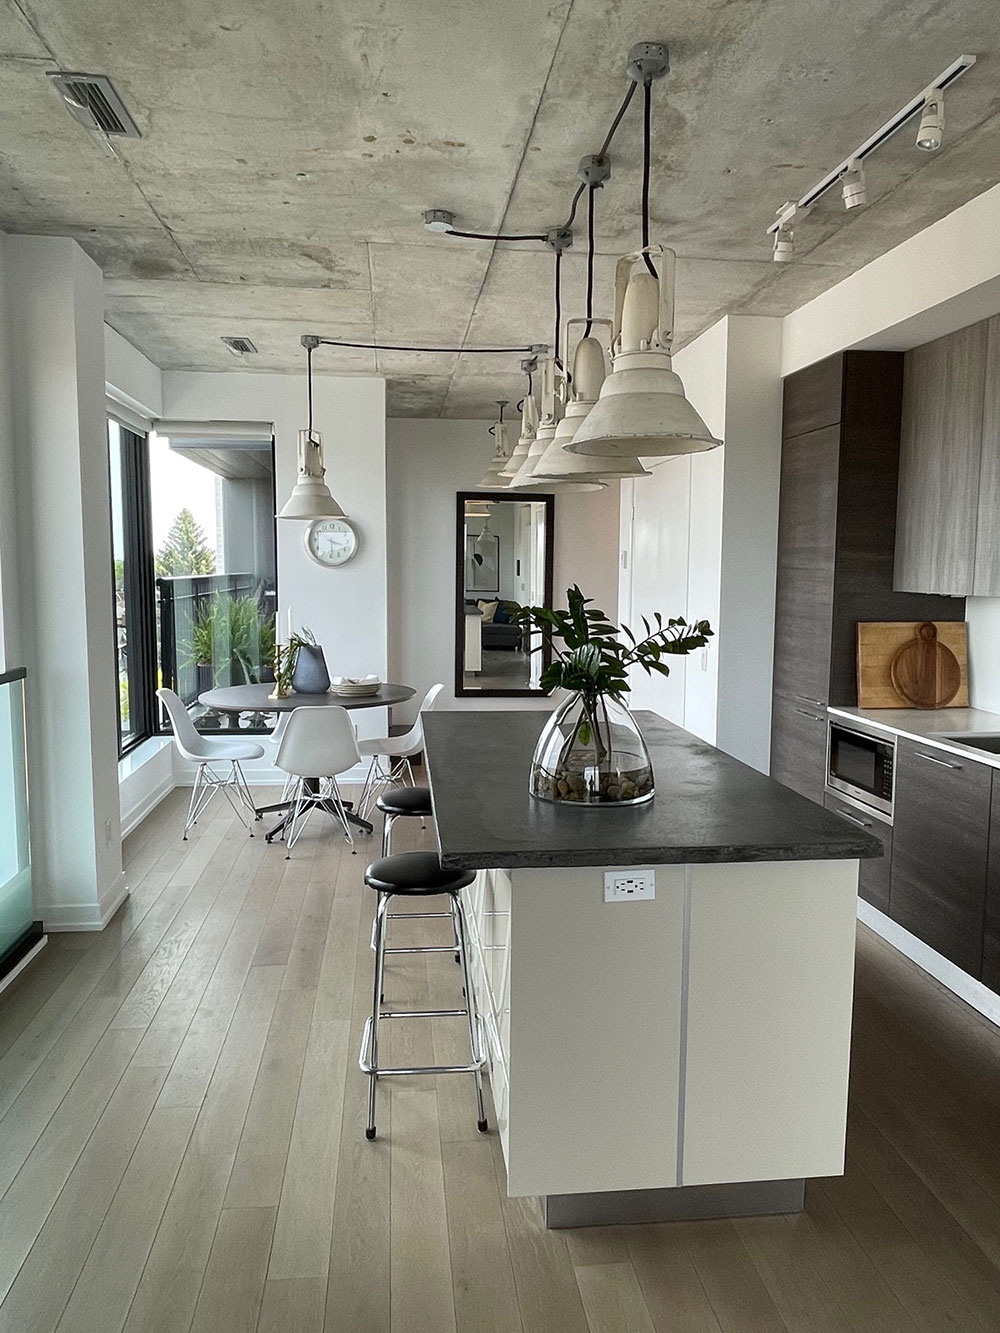 Homefront Redesigns Indian Grove kitchen area